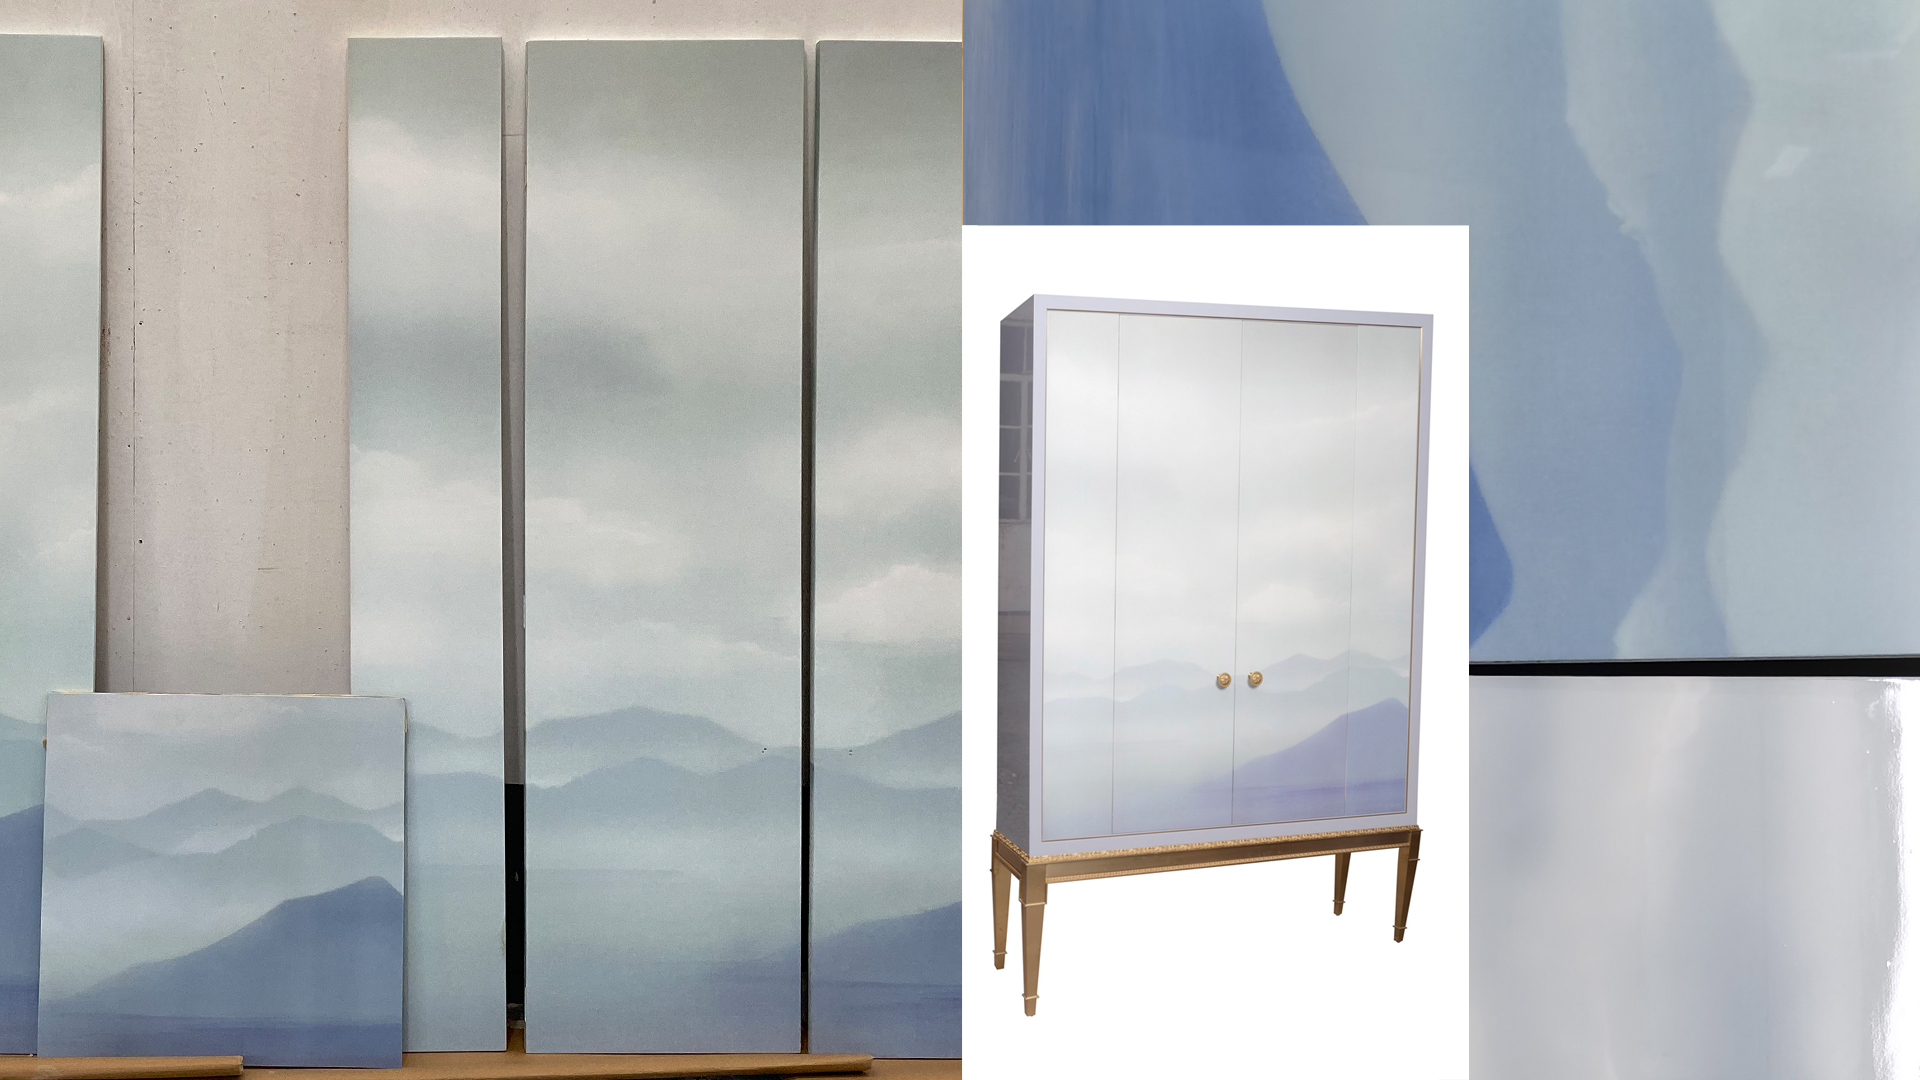 One of the challenges faced during the production of this project was the development of hand-painted doors for minibars. The minibar above features a misty mountain landscape.